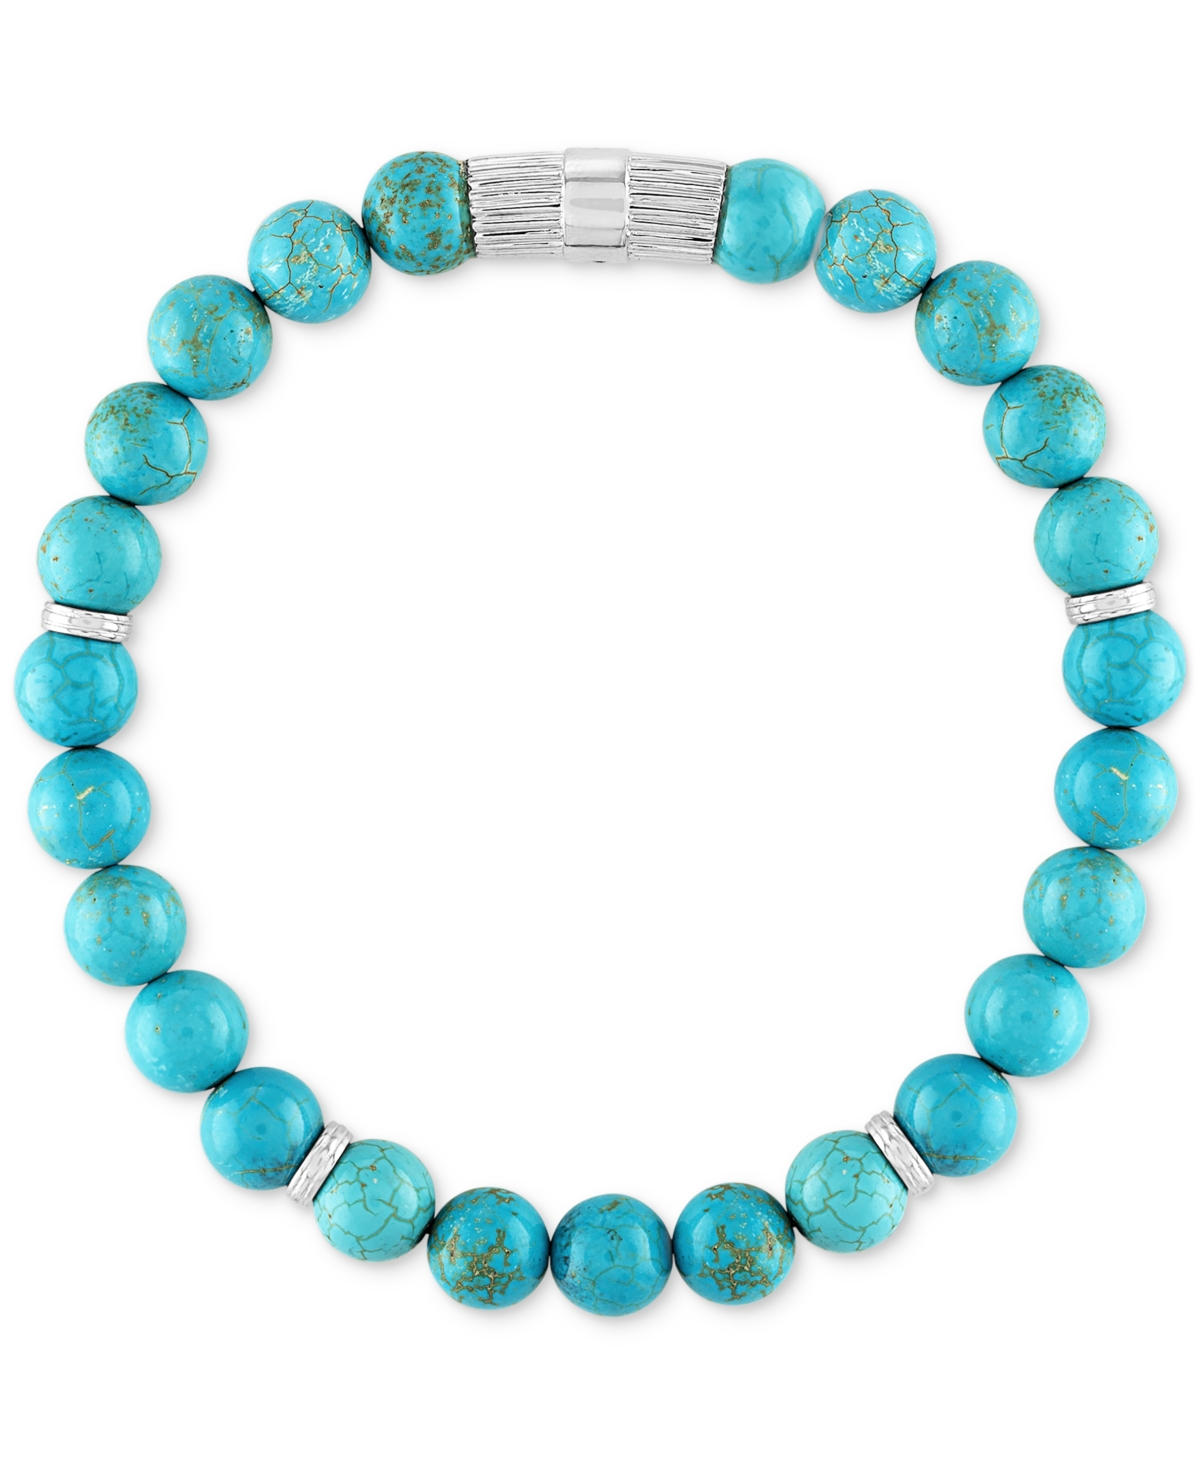 Esquire Men's Jewelry Reconstituted Turquoise Beaded Stretch Bracelet In Sterling Silver, Created For Macy's